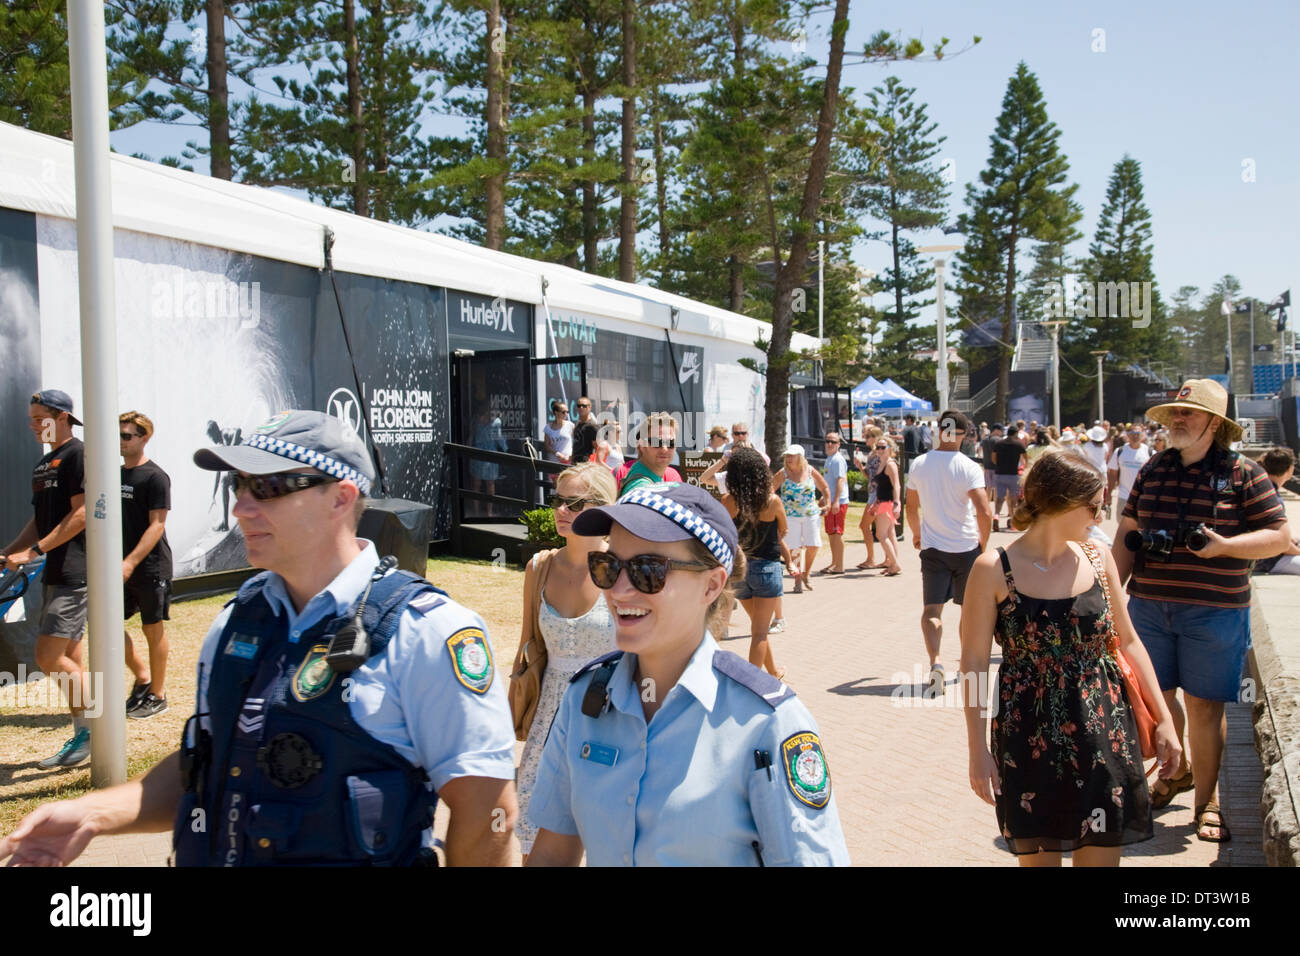 Two new south wales police officers male and female on patrol during  Hurley Australian Open of Surfing at Sydney's Iconic Manly Beach,Australia Stock Photo